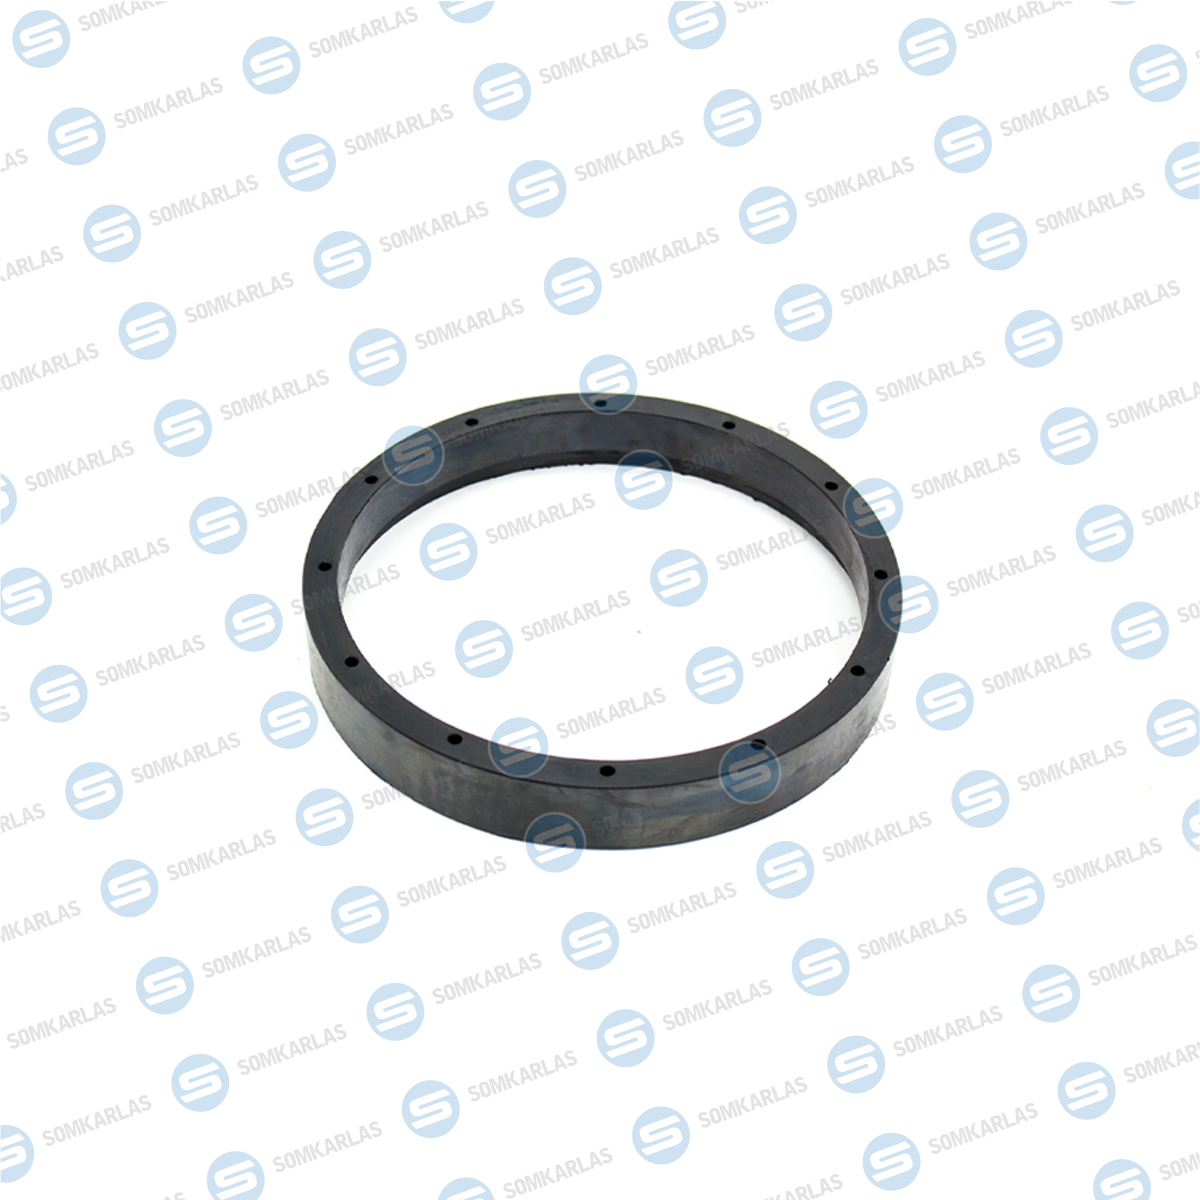 SOM20005 - THRUST RING WITH STEEL - 